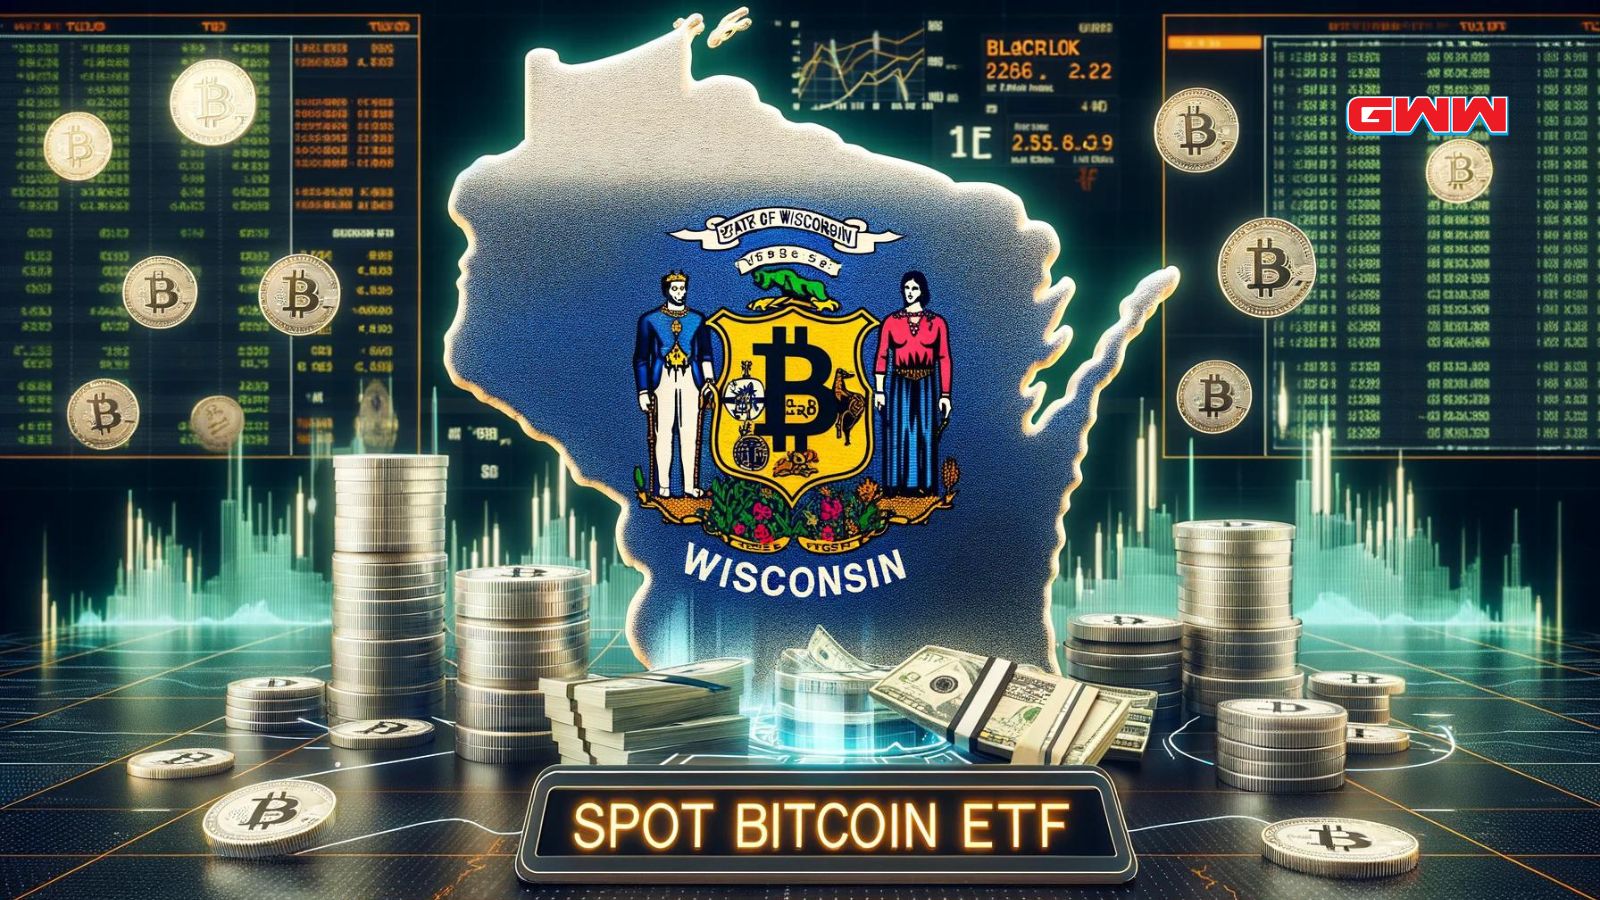 Wisconsin map with Bitcoin symbol, stacks of coins, and trading screens